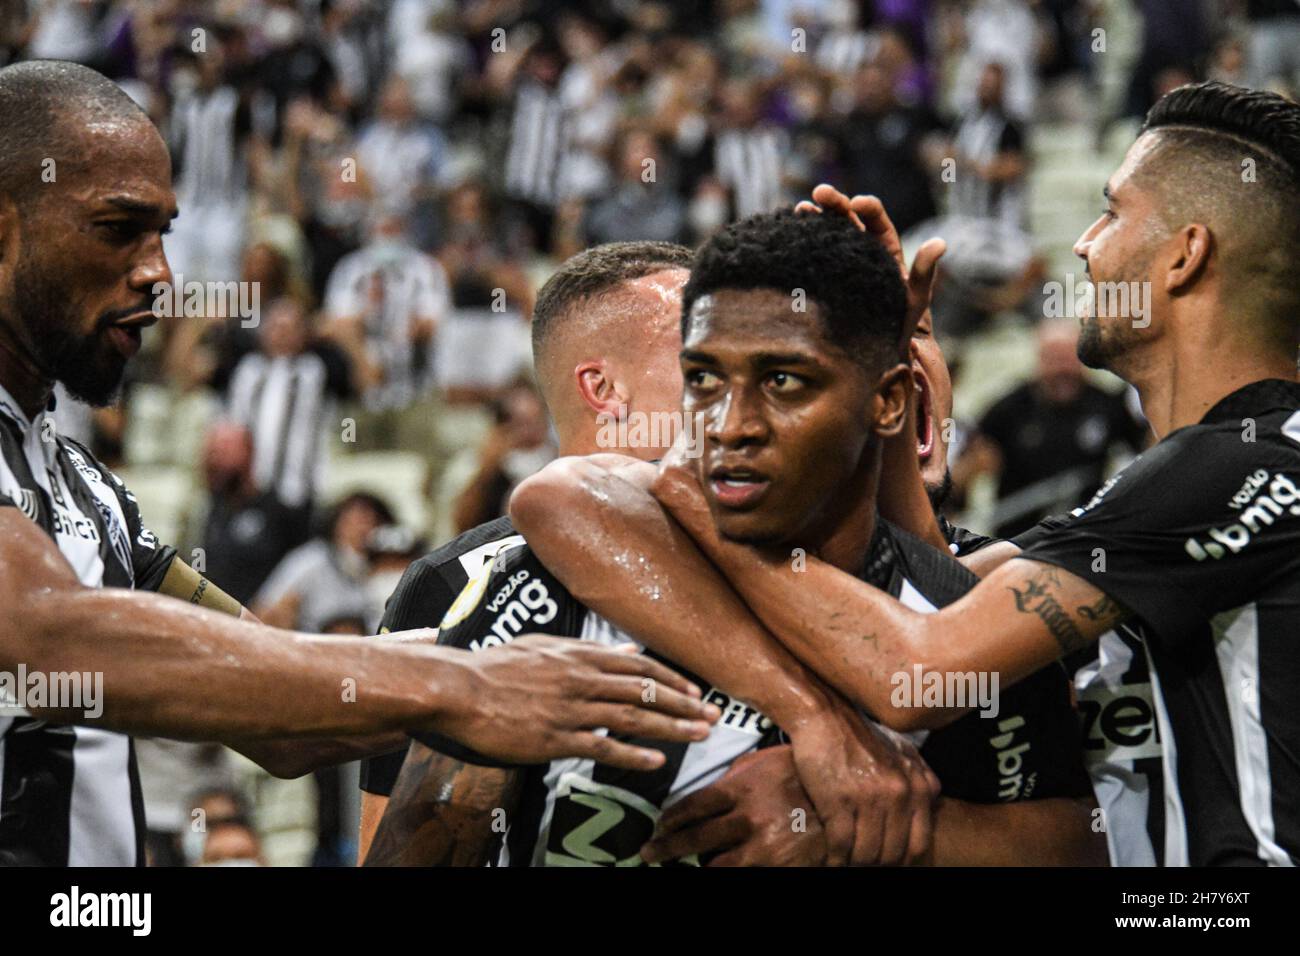 Fortaleza team posed during the game between Corinthians and